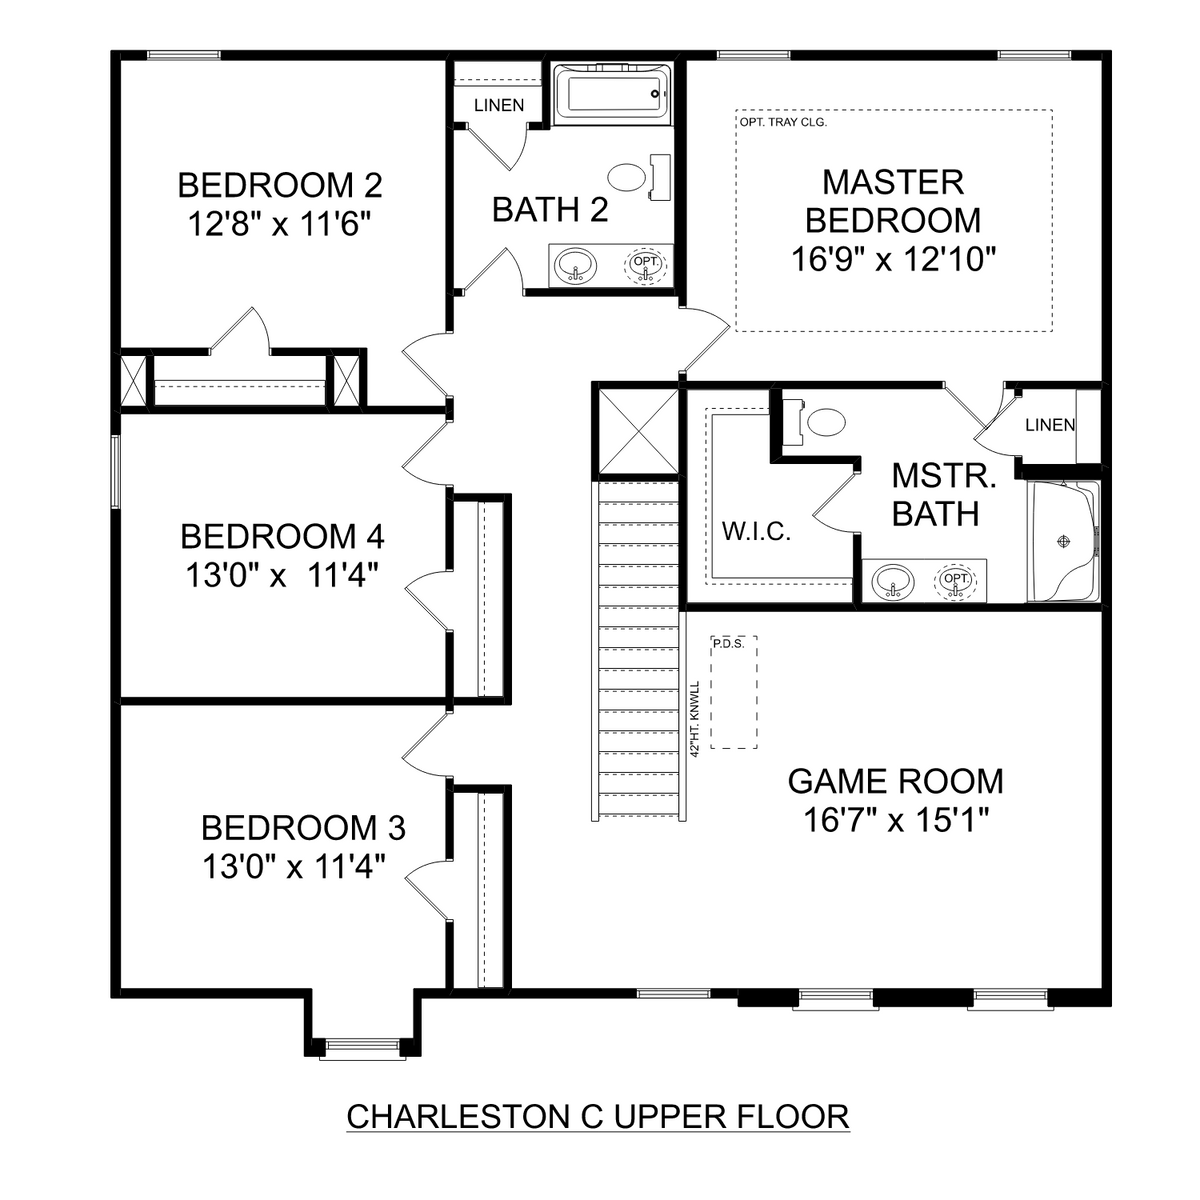 2 - The Charleston C floor plan layout for 138 Barn Trail Way in Davidson Homes' Ivy Hills community.